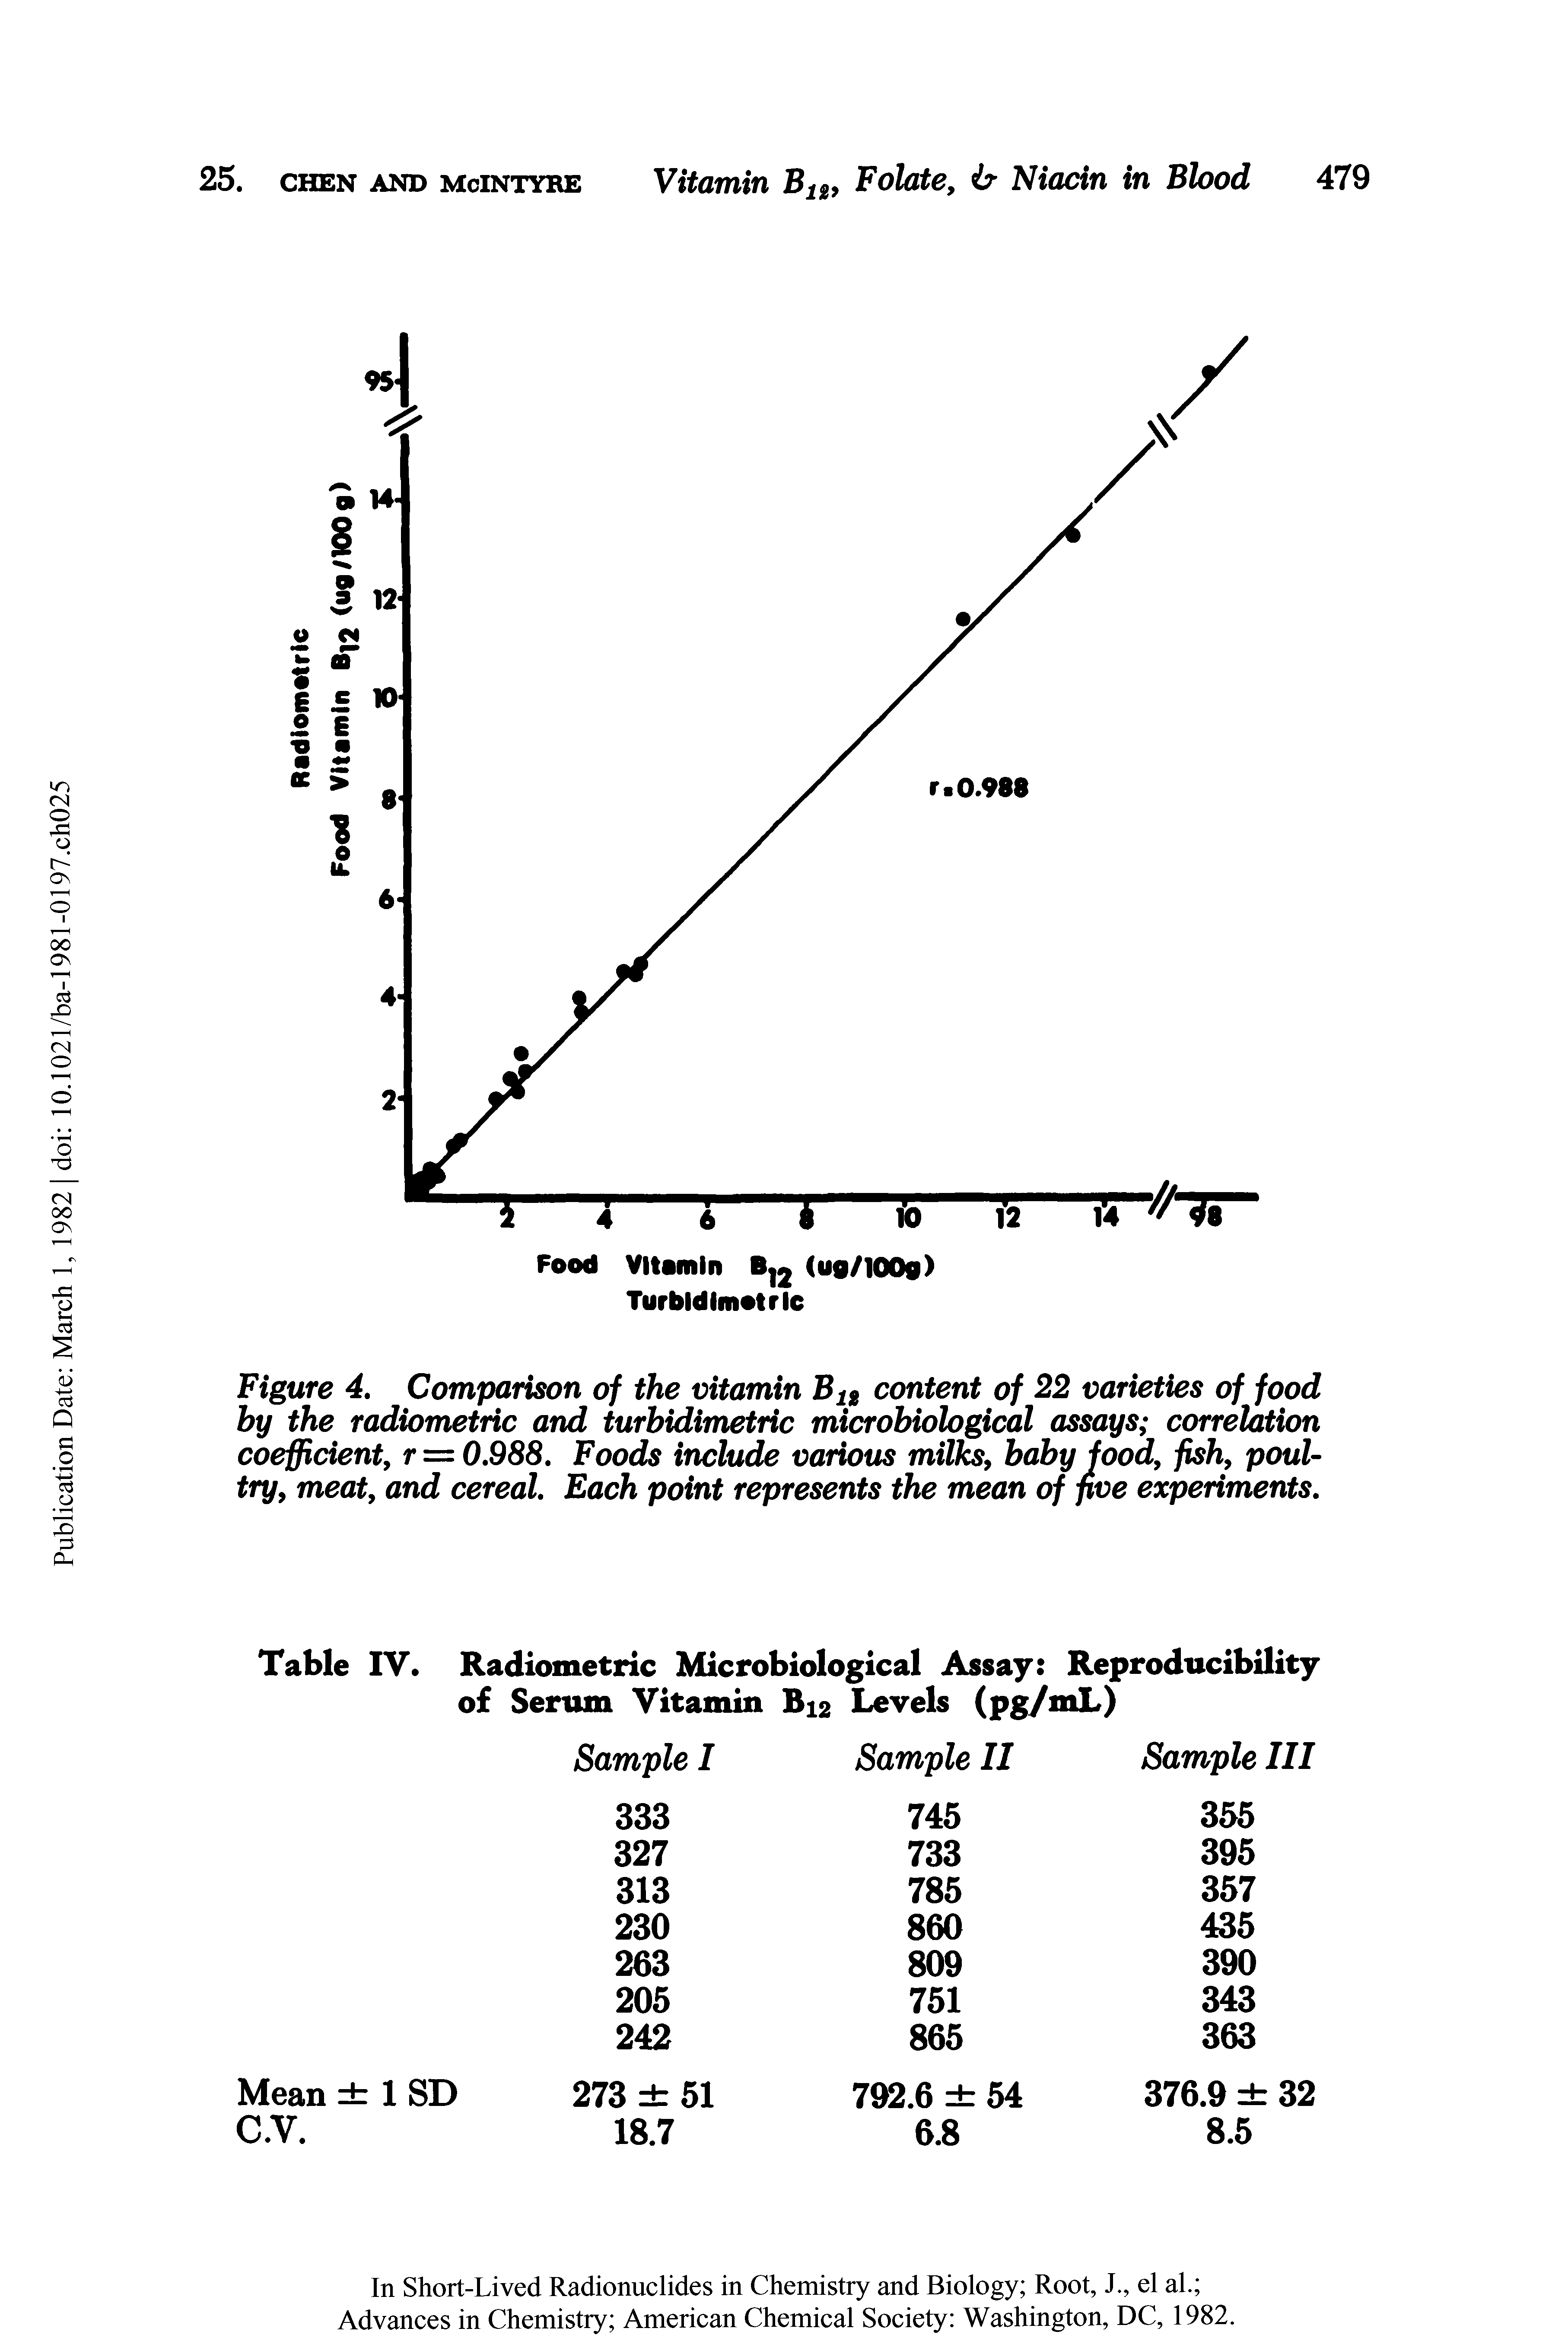 Figure 4. Comparison of the vitamin B12 content of 22 varieties of food by the radiometric and turbidimetric microbiological assays correlation coefficient, r = 0.988. Foods include various mil baby food, fish, poultry, meat, and cereal. Each point represents the mean of five experiments.